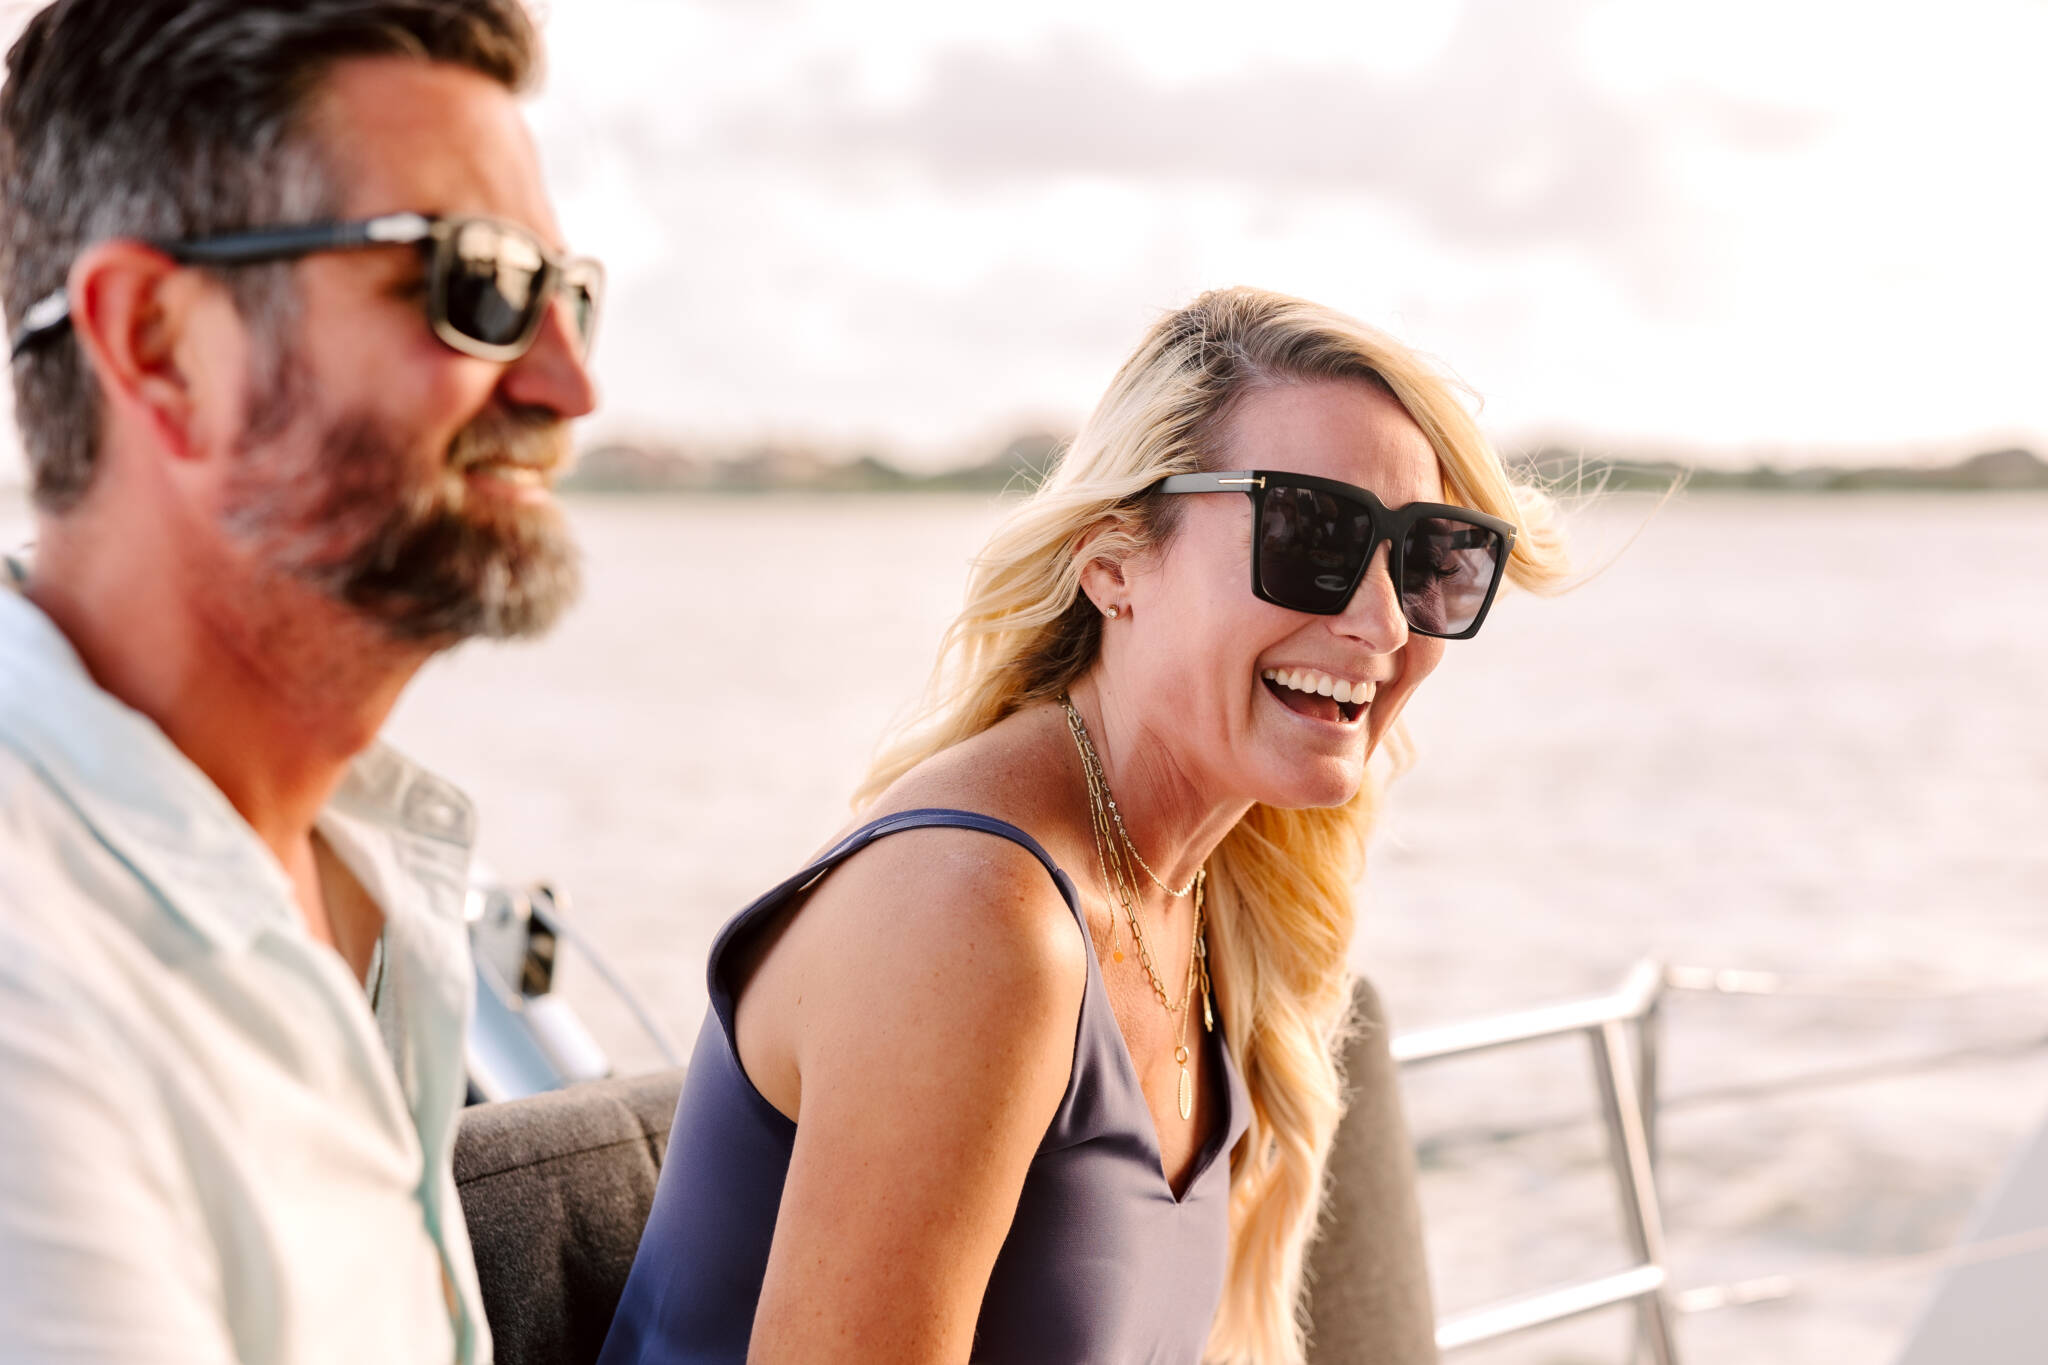 St Augustine Sailing - Dinner Cruise - Sunset Cruise - Sip & Sail - Date Night - Fun with friends - Things to do in St Augustine